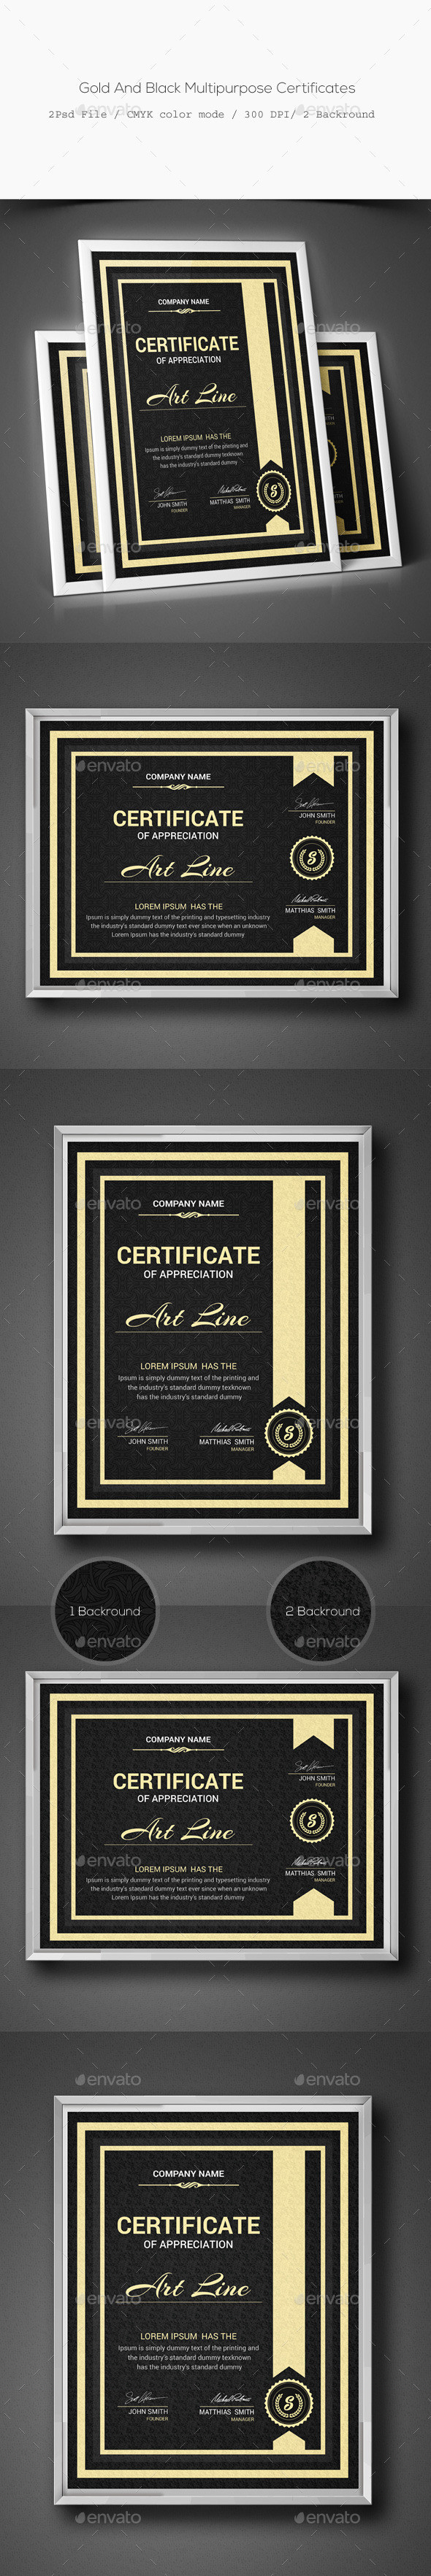 Gold and black multipurpose certificates preview